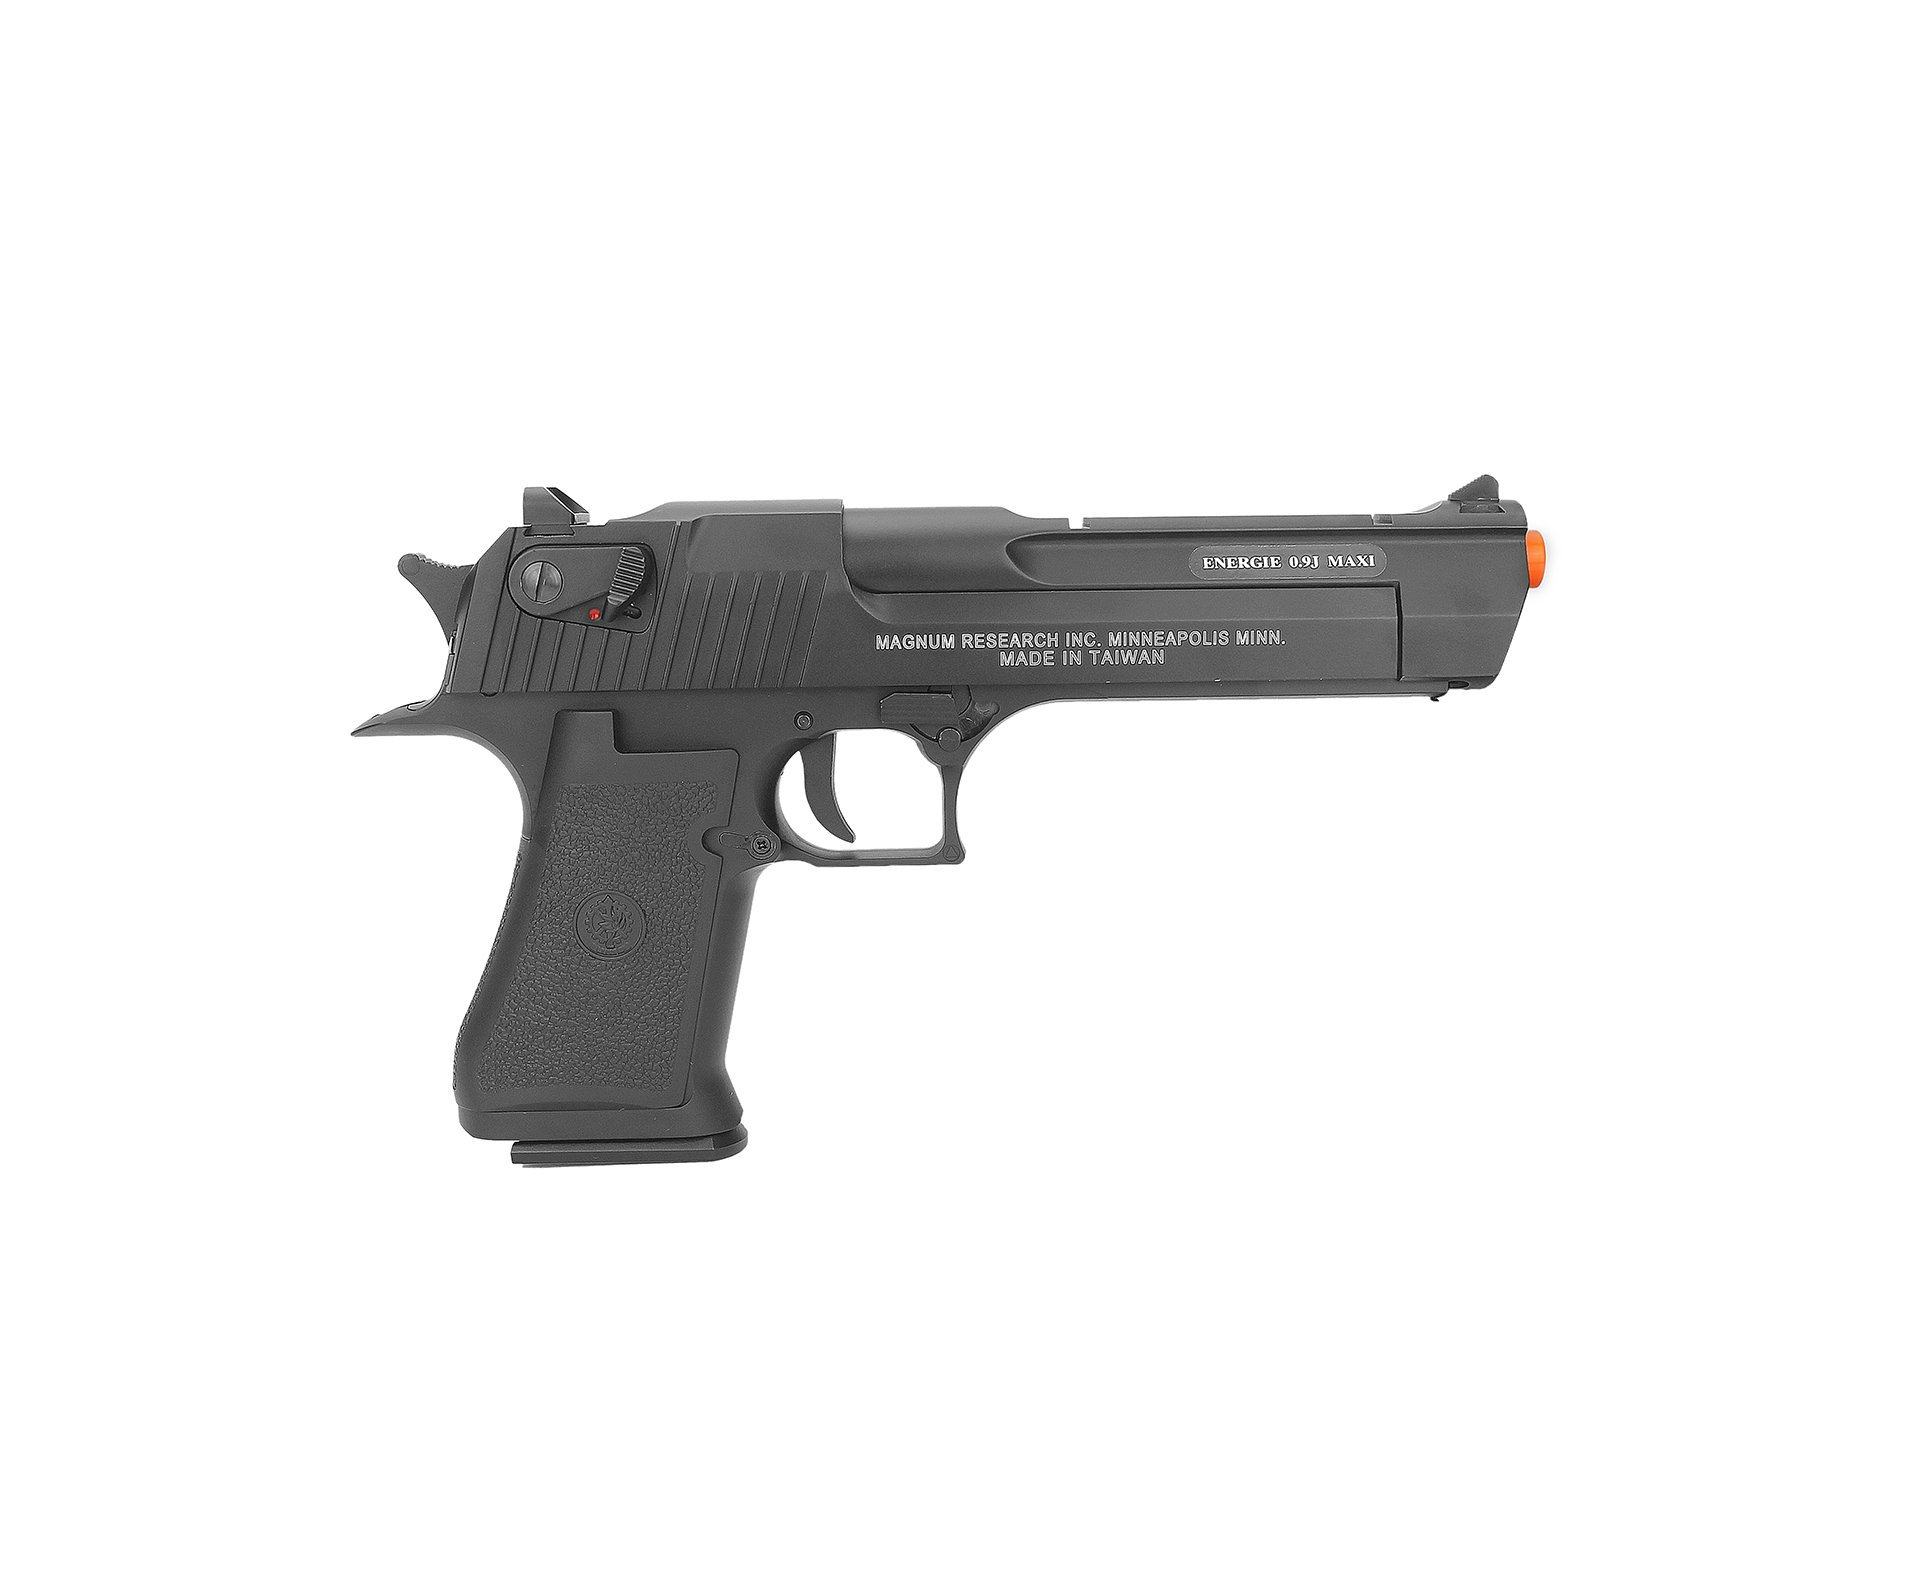 Pistola Airsoft Gas Co2 Airsoft Desert Eagle Blowback 6mm